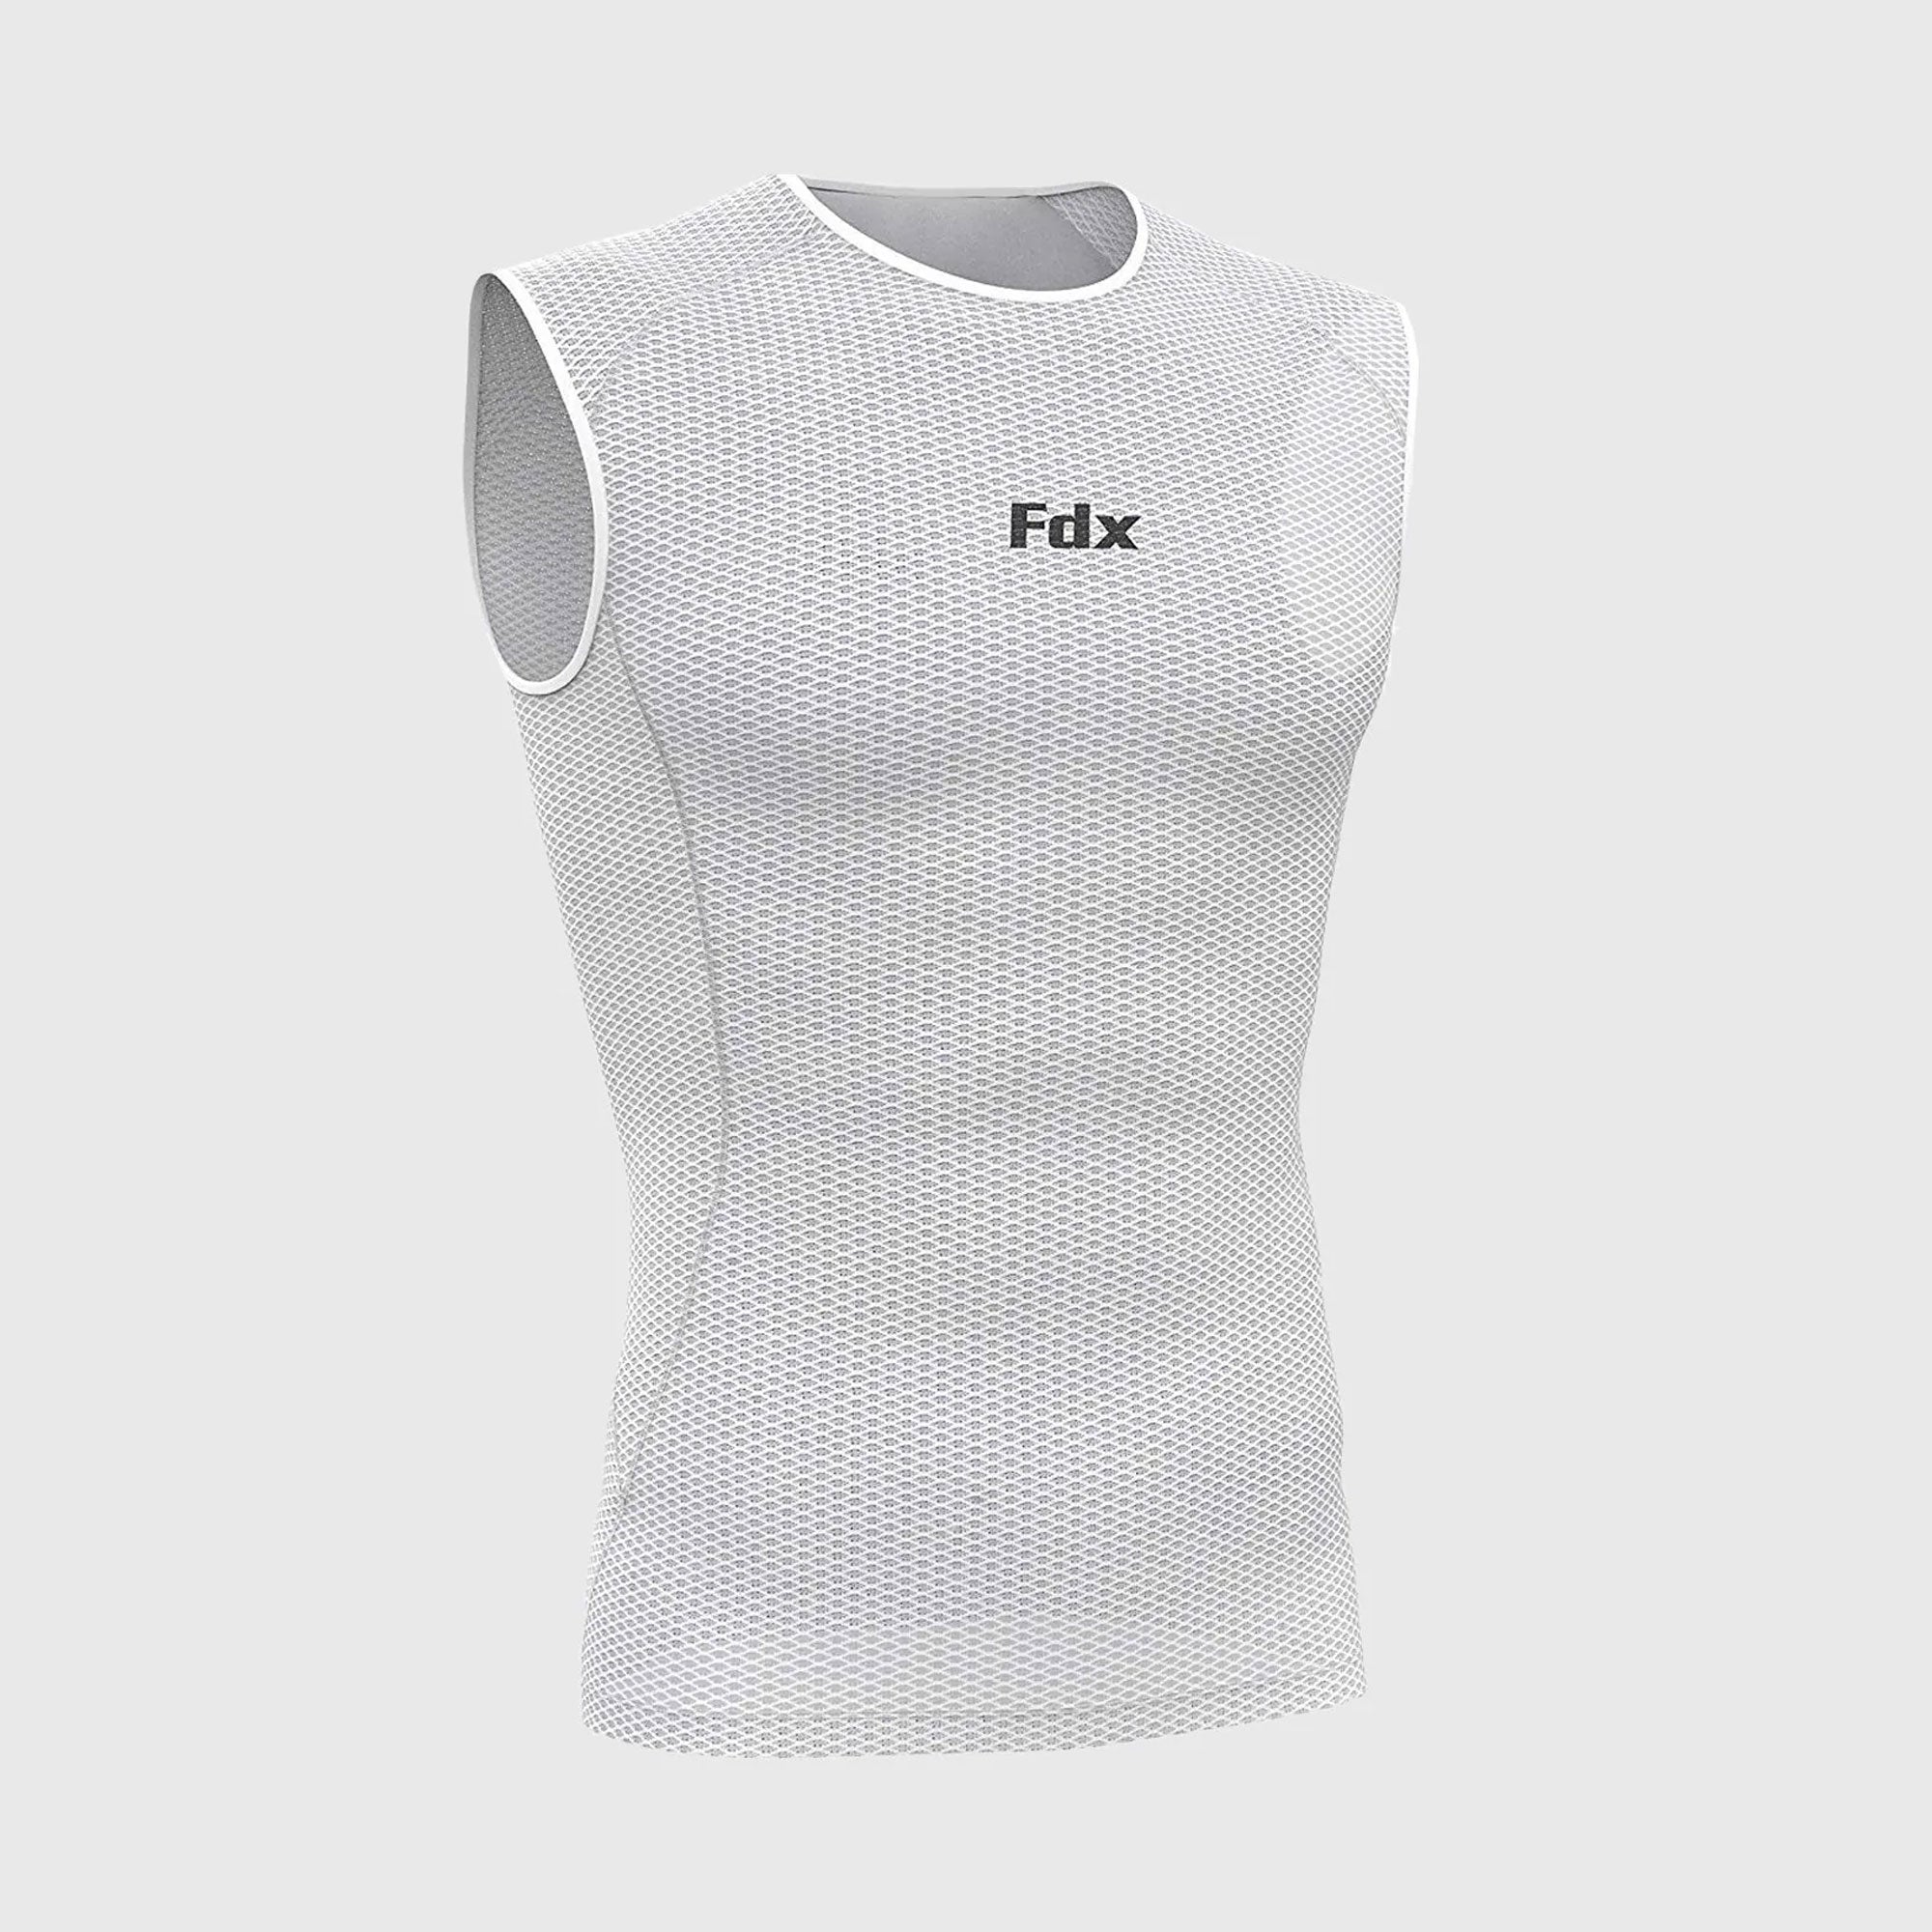 Fdx Men's White Sleeveless Mesh Compression Top Running Gym Workout Wear Rash Guard Stretchable Breathable Lightweight - Aeroform